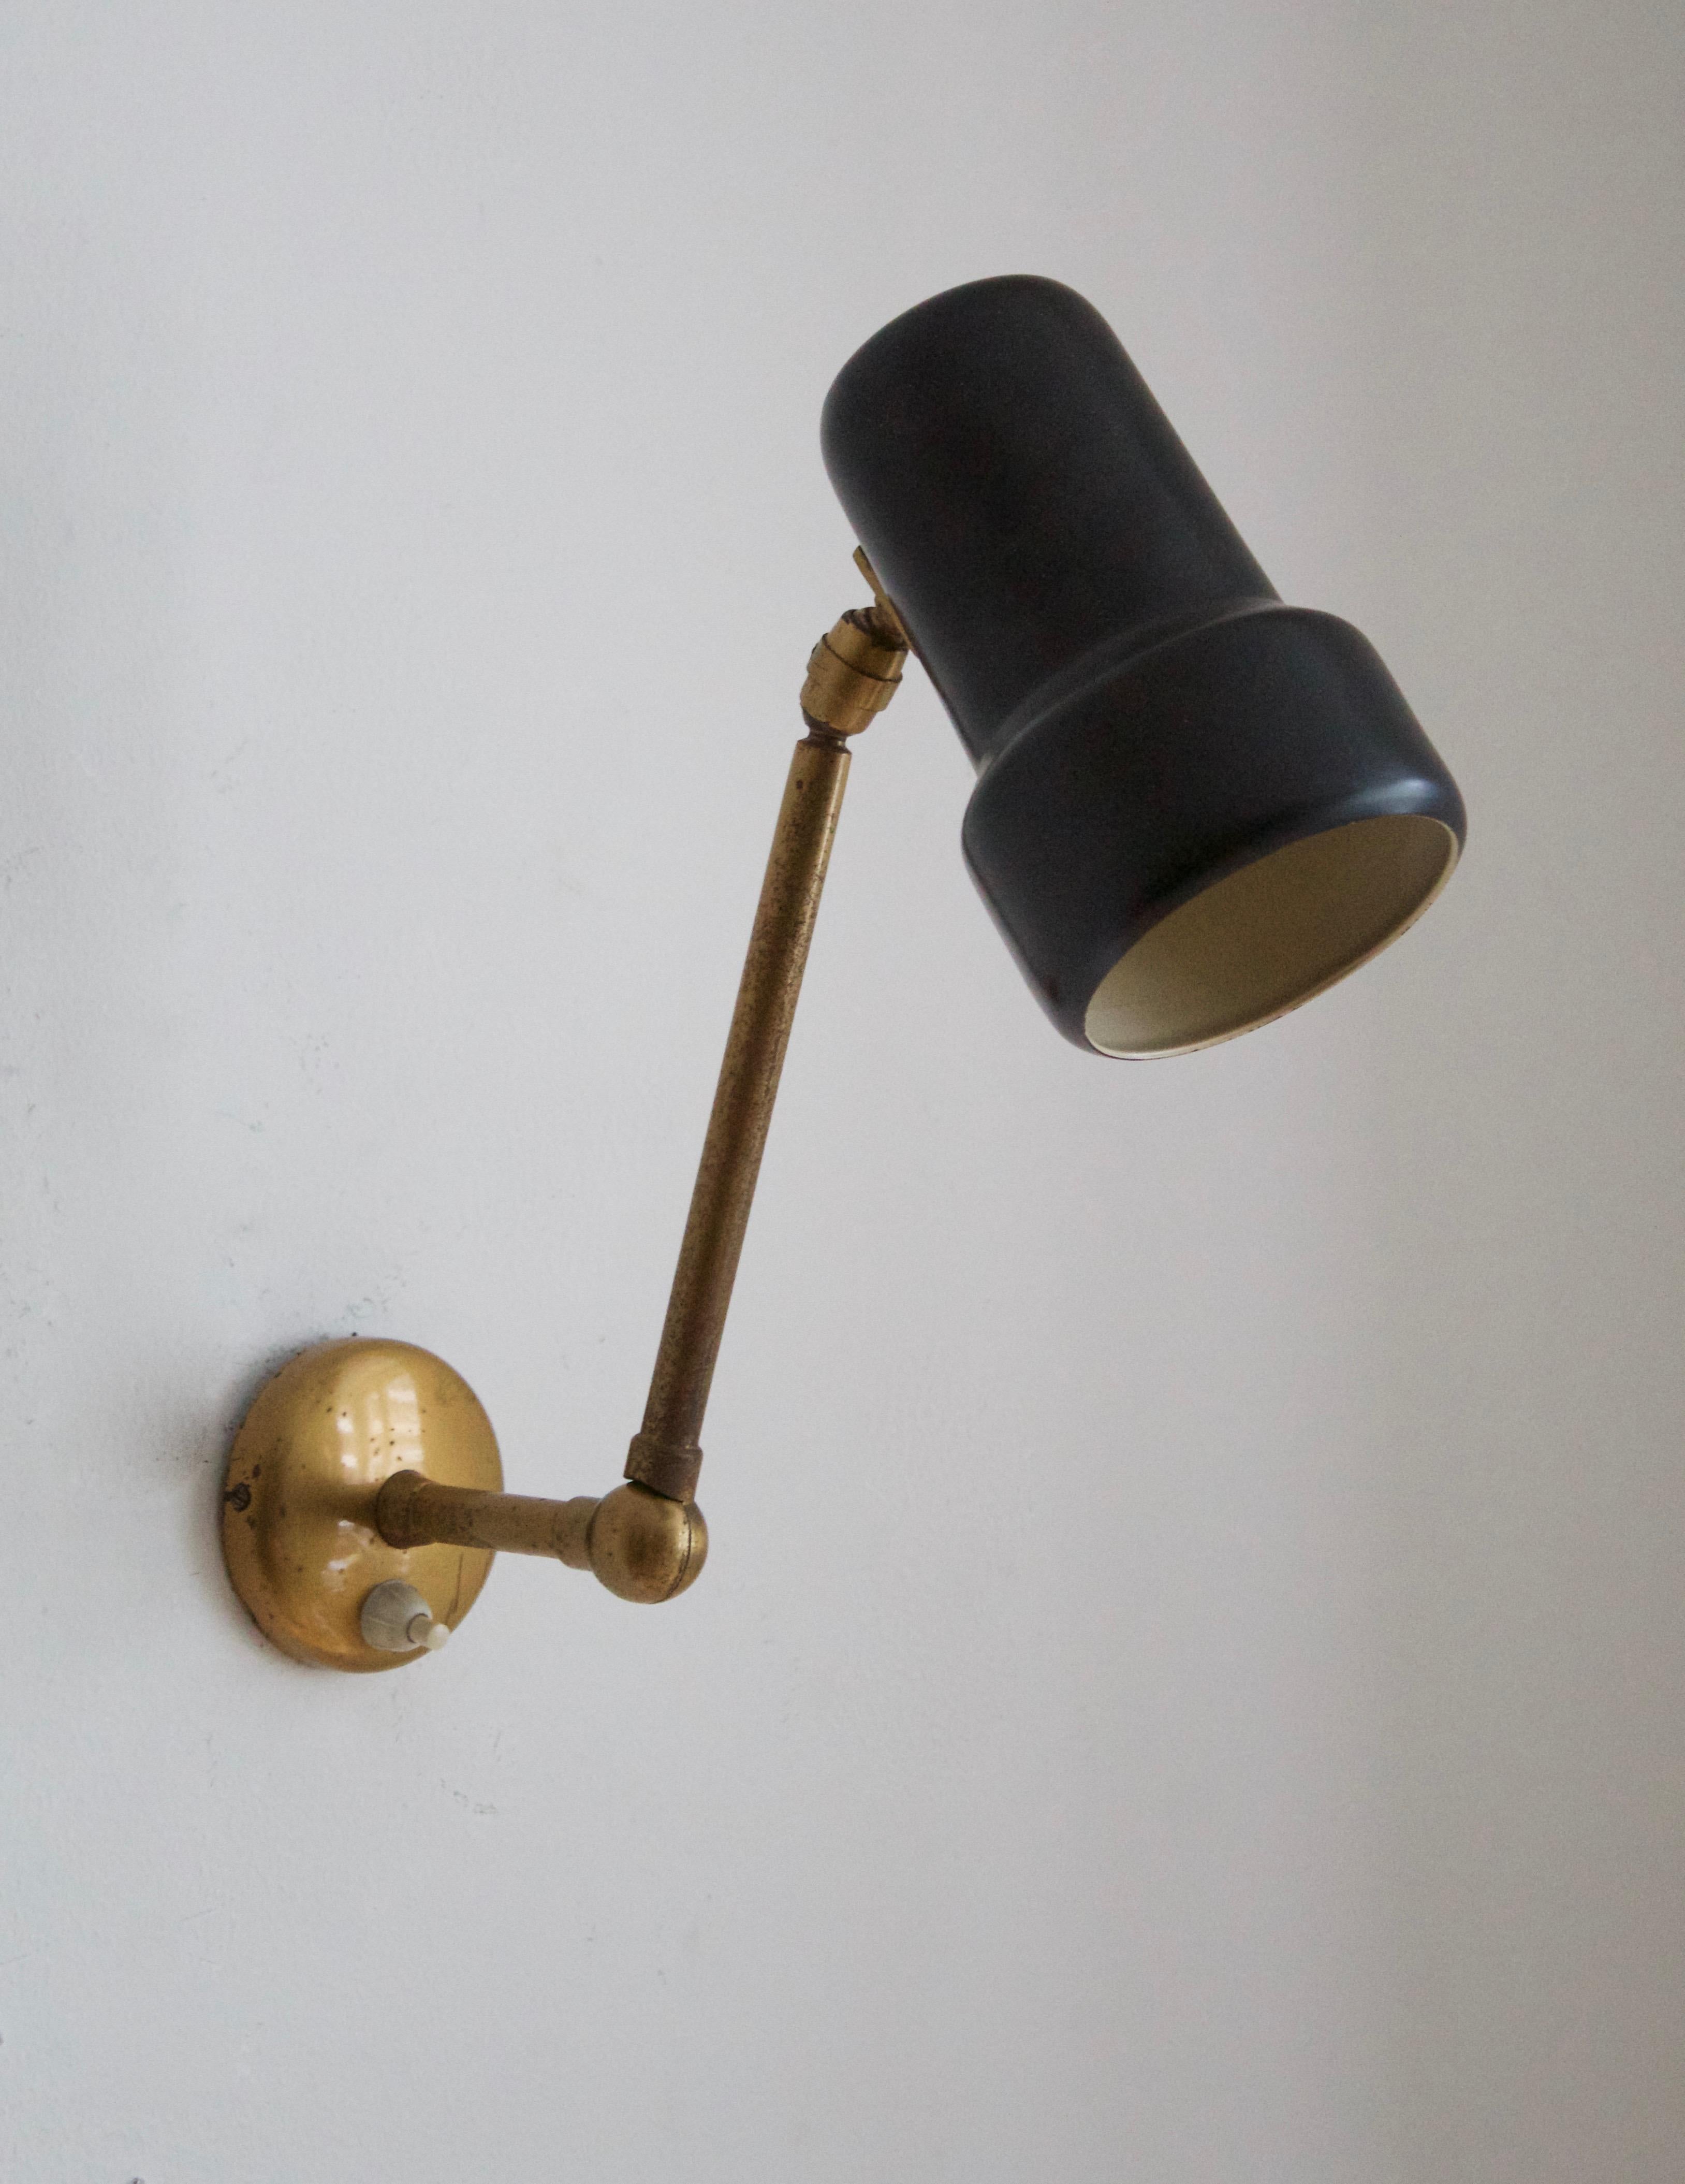 A wall light light, design and production attributed to Stilnovo, Italy, 1950s. Features brass and black lacquered metal.

Other designers of the period include Angelo Lelii, Gino Sarfatti, Max Ingrand, Serge Mouille.

     